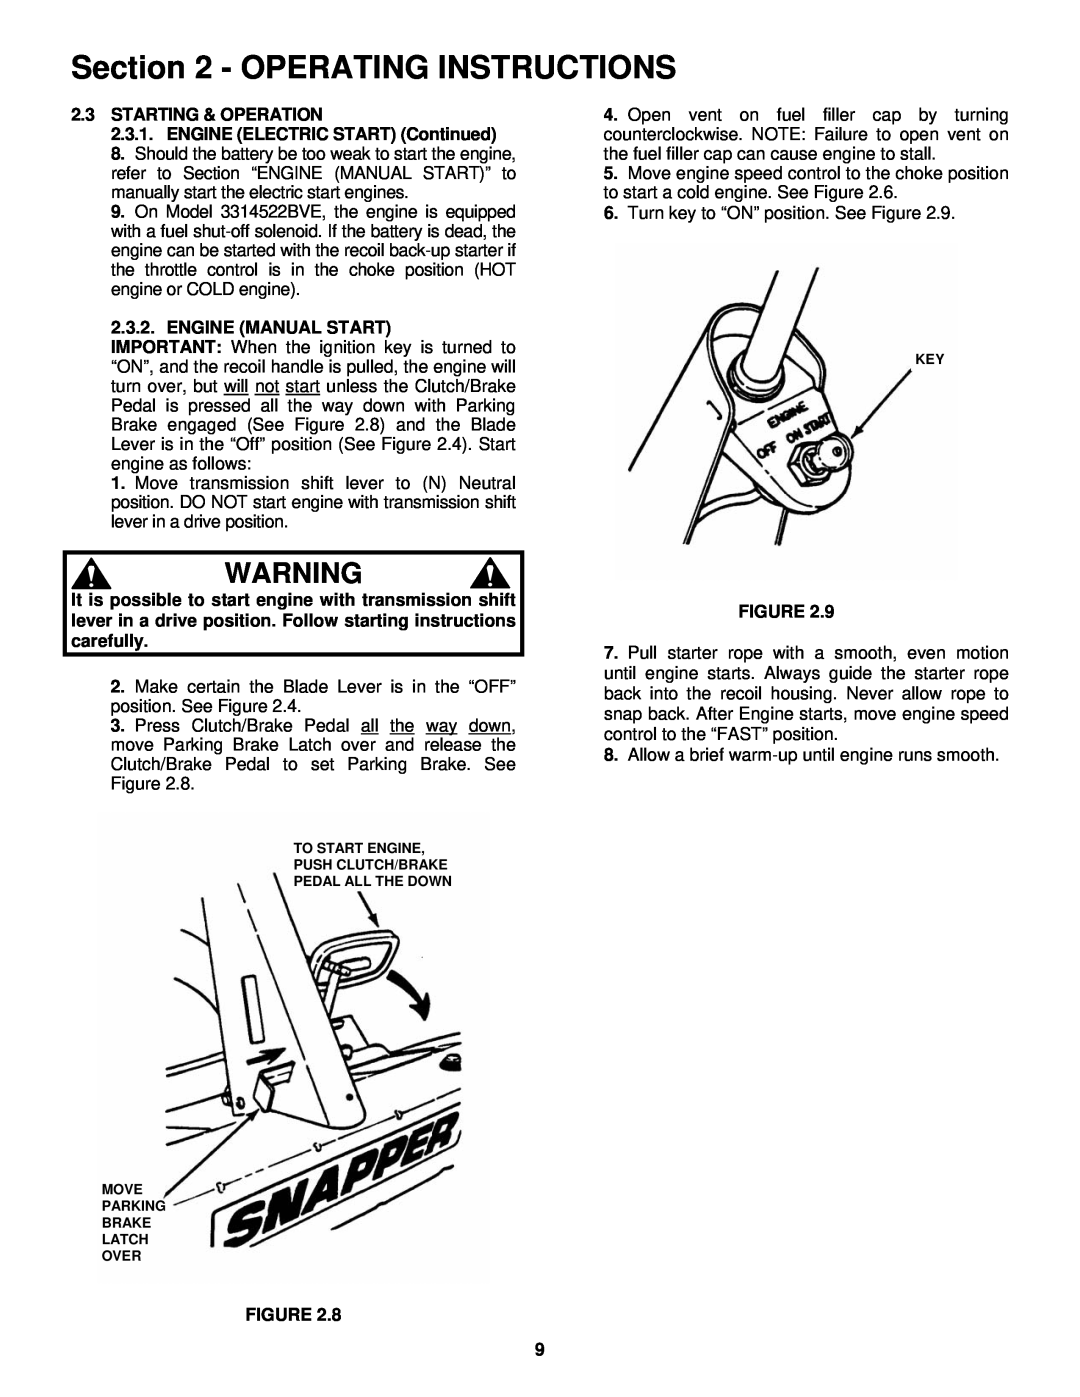 Snapper important safety instructions Operating Instructions, Starting & Operation, Engine Manual Start 